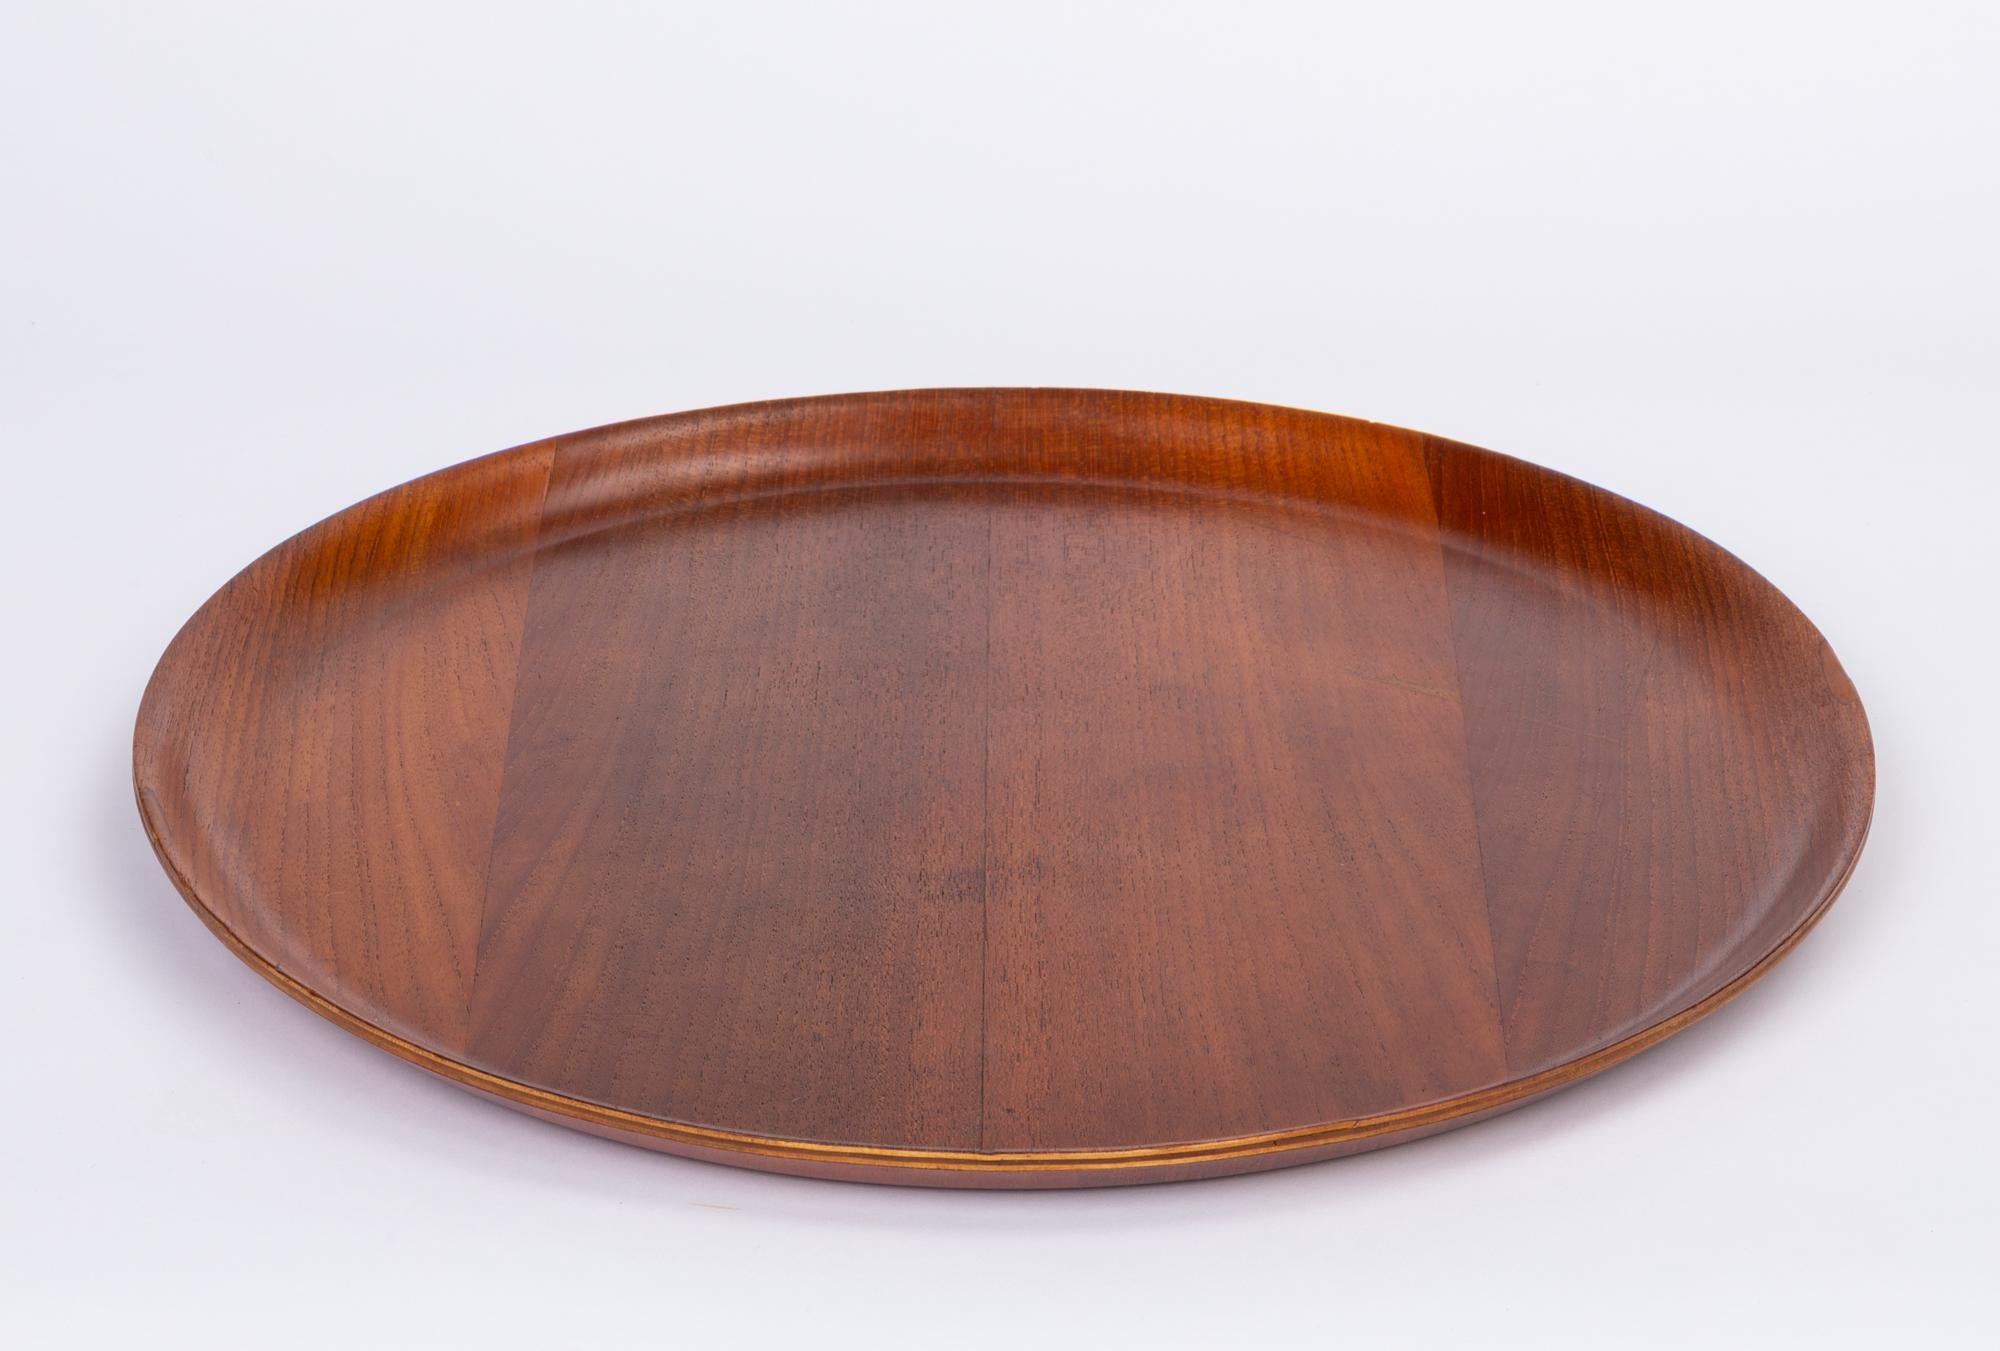 Round teak serving tray from Sweden. The tray features curved raised edges and beautiful grain that is more apparent with the hand applied oil finish.

Marked on underside [Made in Sweden]

Dimensions: 18” diameter x 1’ height.

Condition: